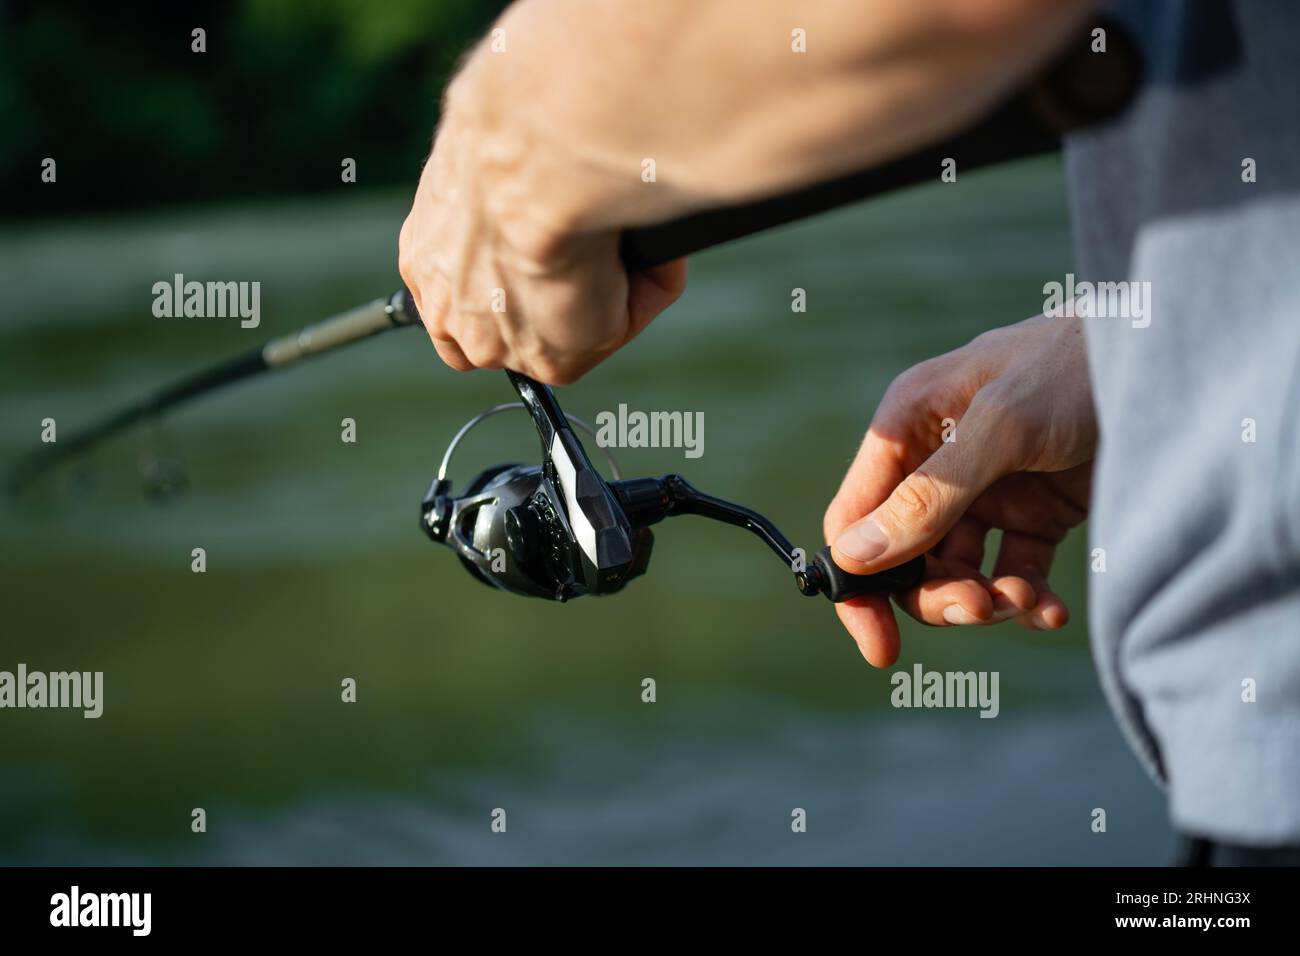 Girl's hand holding fishing rod and reel Stock Photo - Alamy